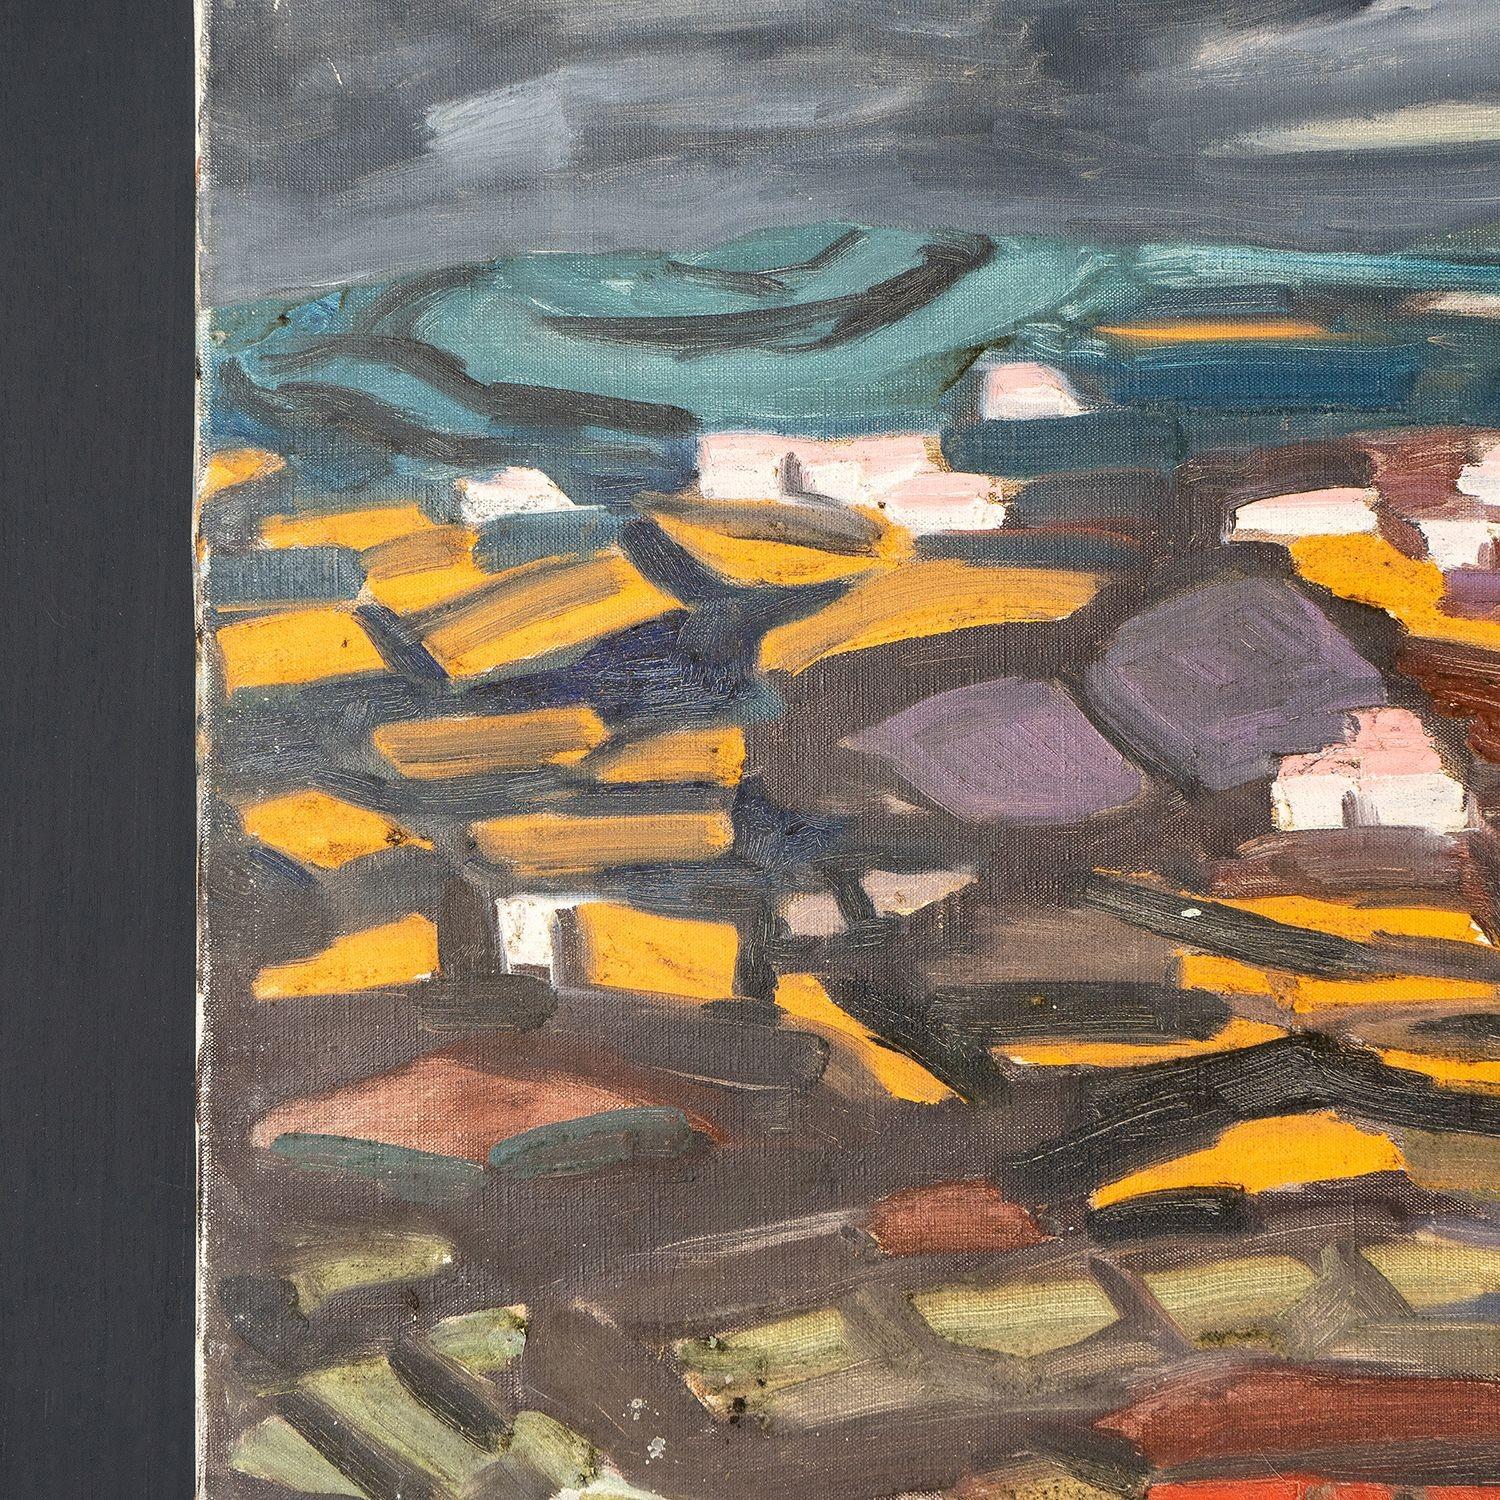 Vintage Original Oil on Canvas Painting Bold Expressionist Landscape, 1960s In Good Condition For Sale In Bristol, GB